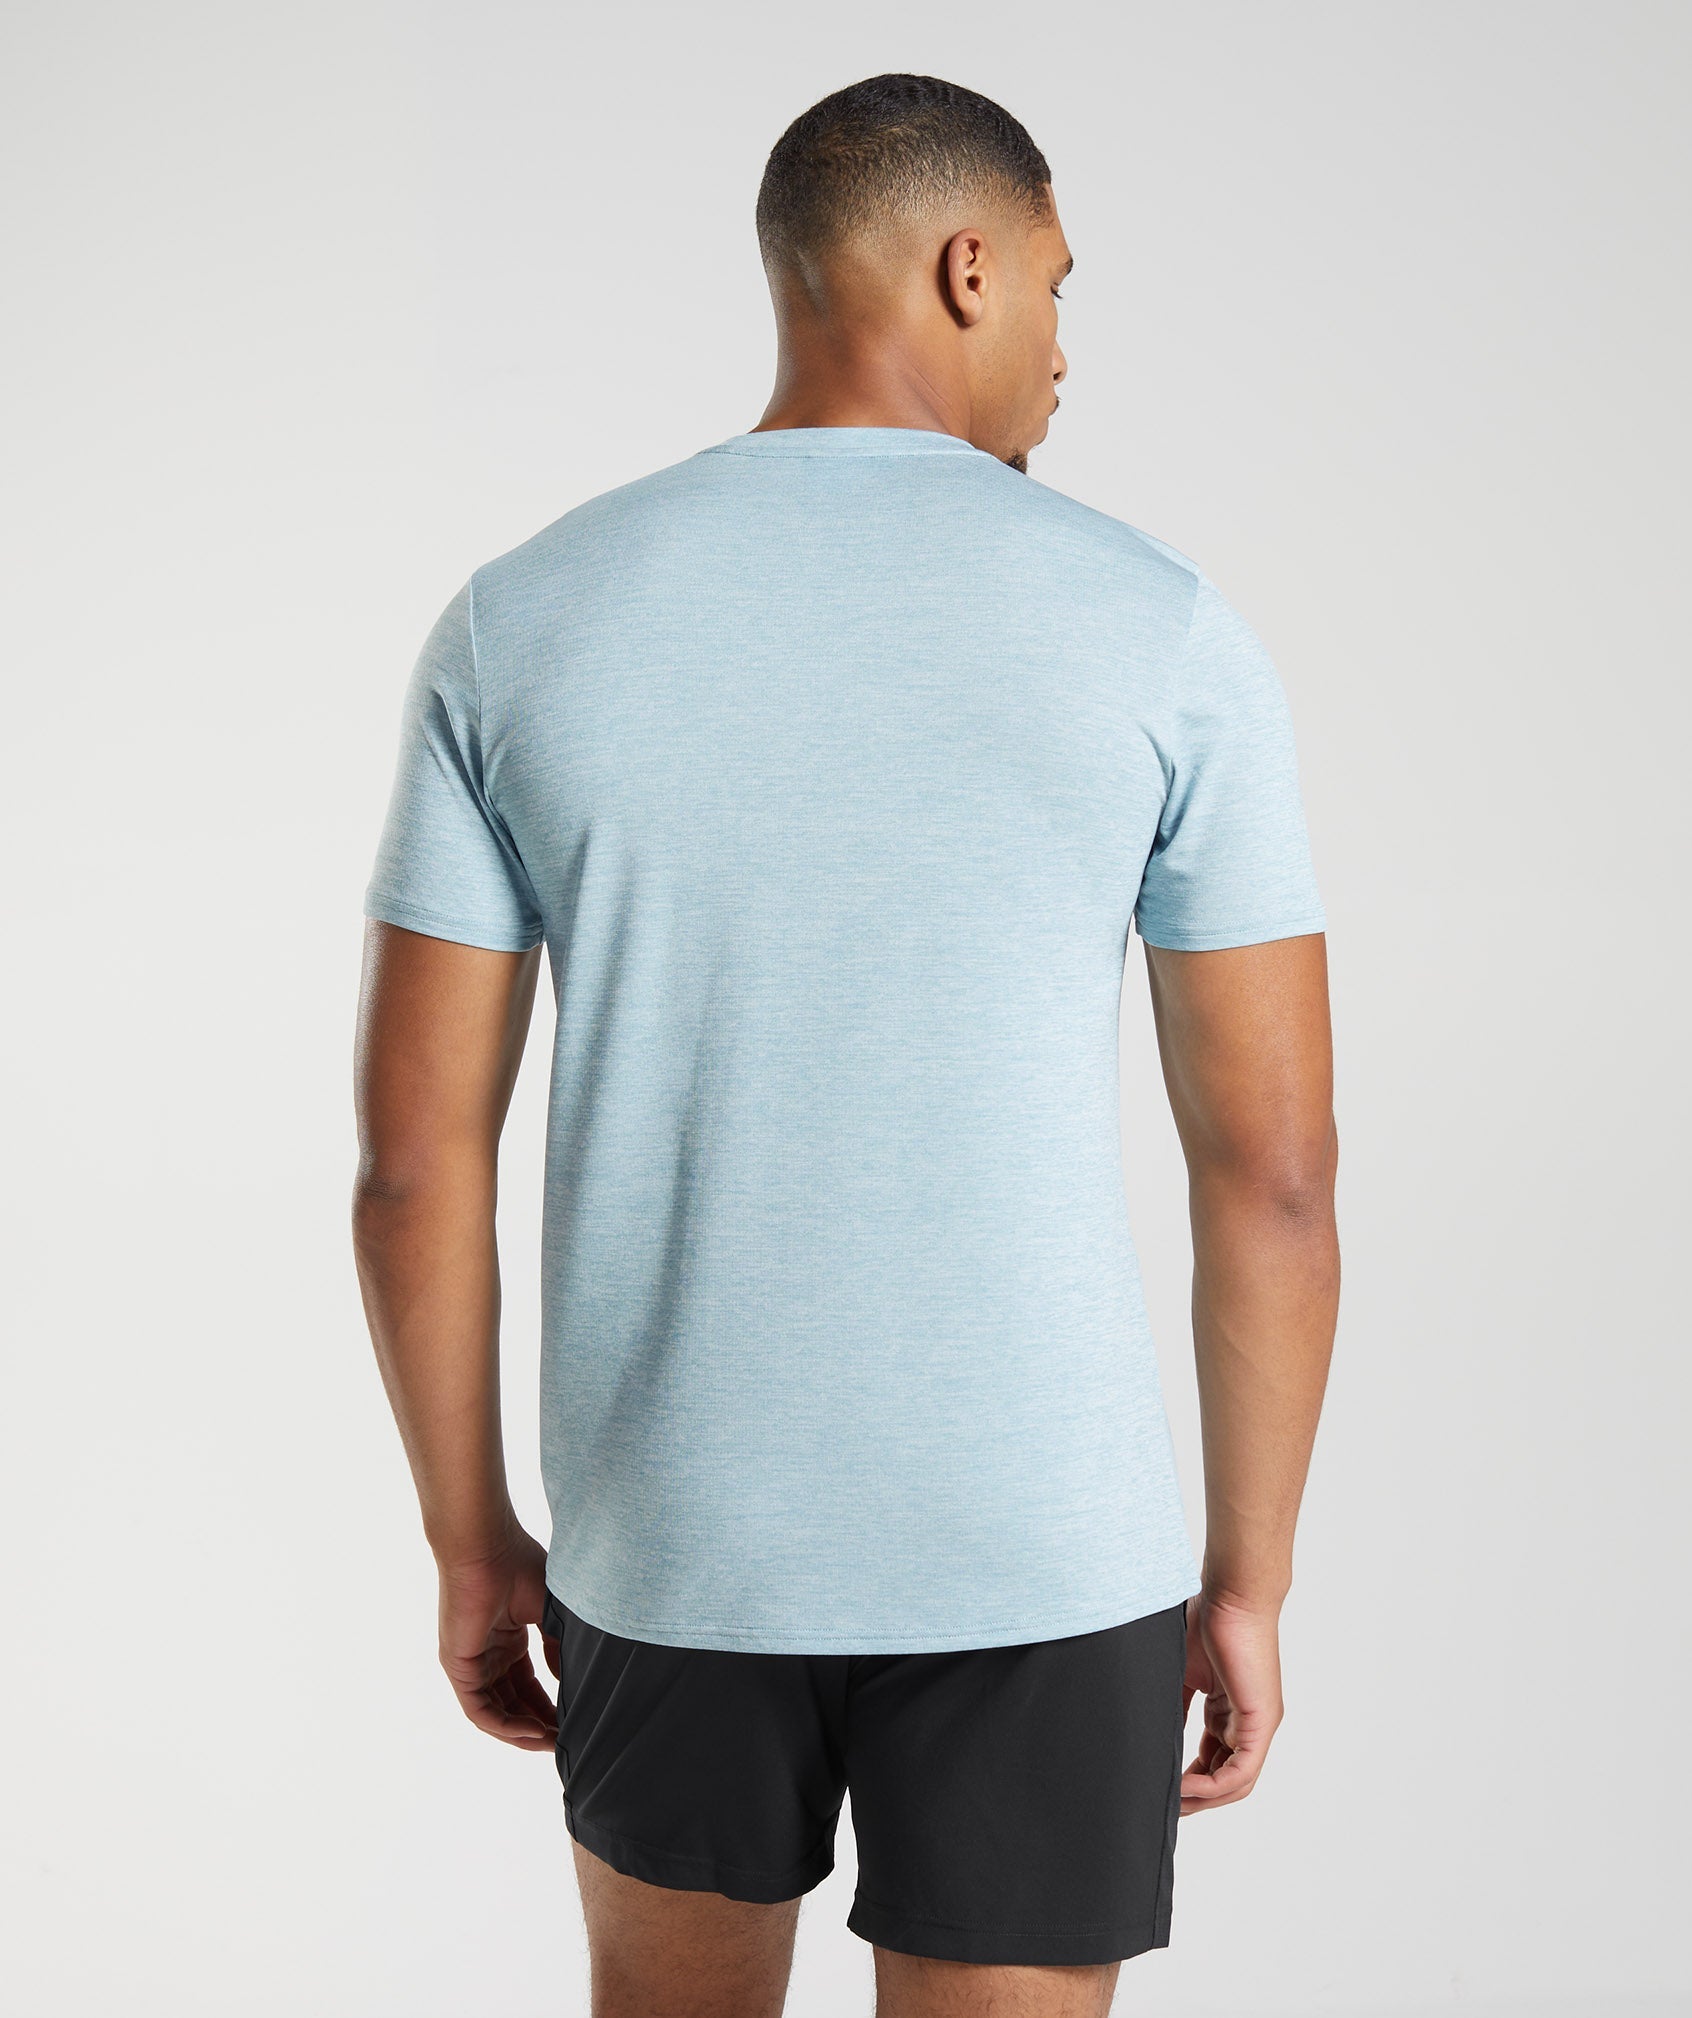 Arrival T-Shirt in Iceberg Blue/Icy Blue Marl - view 2